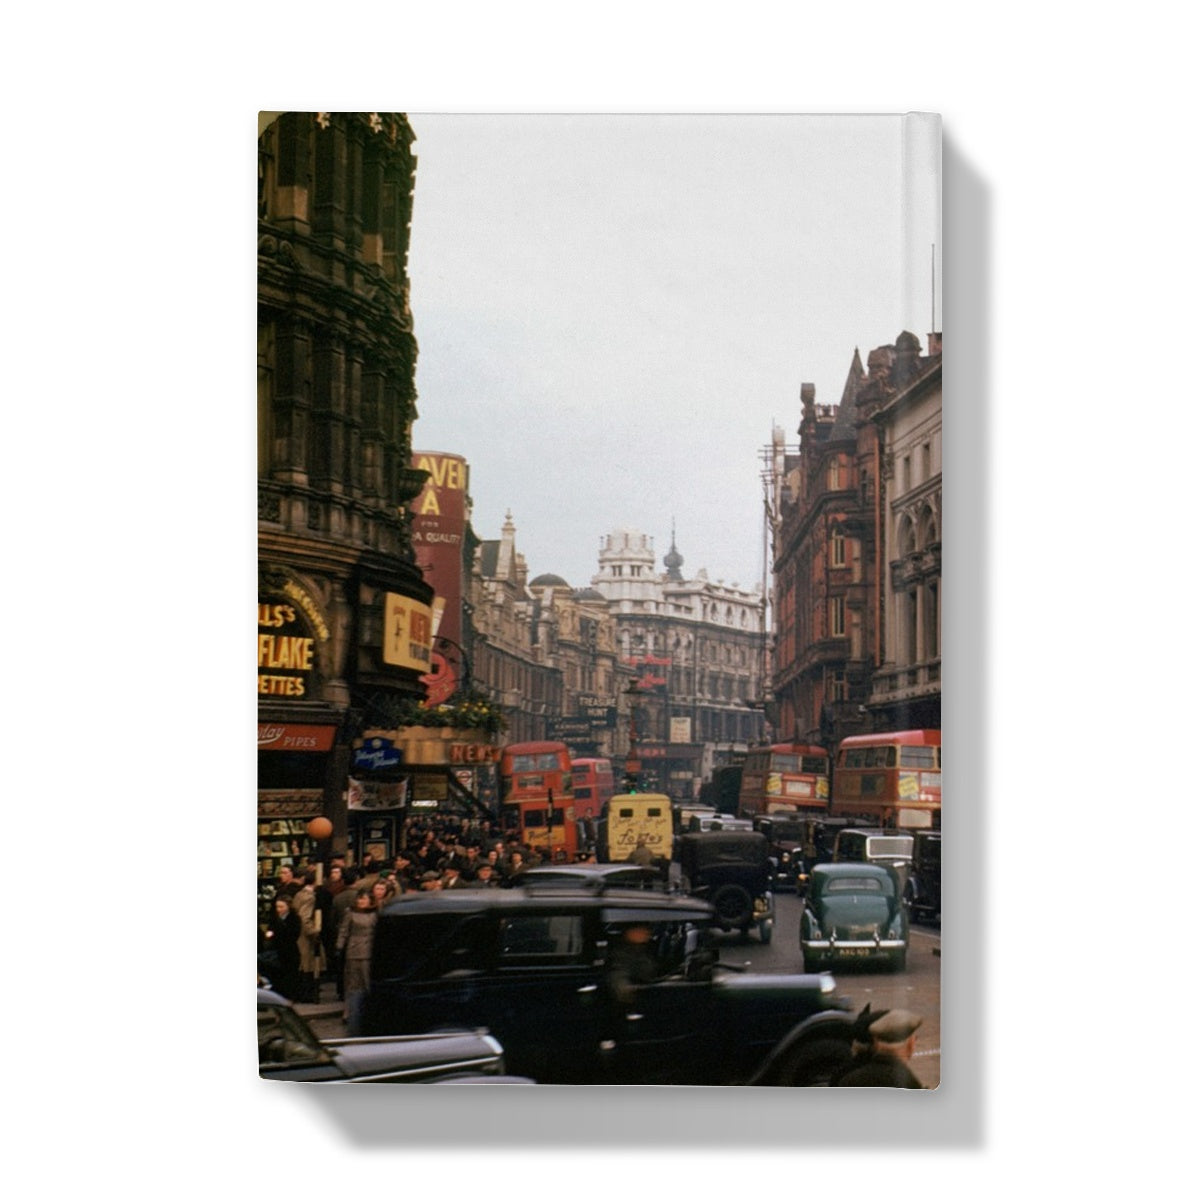 Piccadilly Looking up Shaftesbury Avenue, London by Chalmers Butterfield, 1949 - Hardback Journal